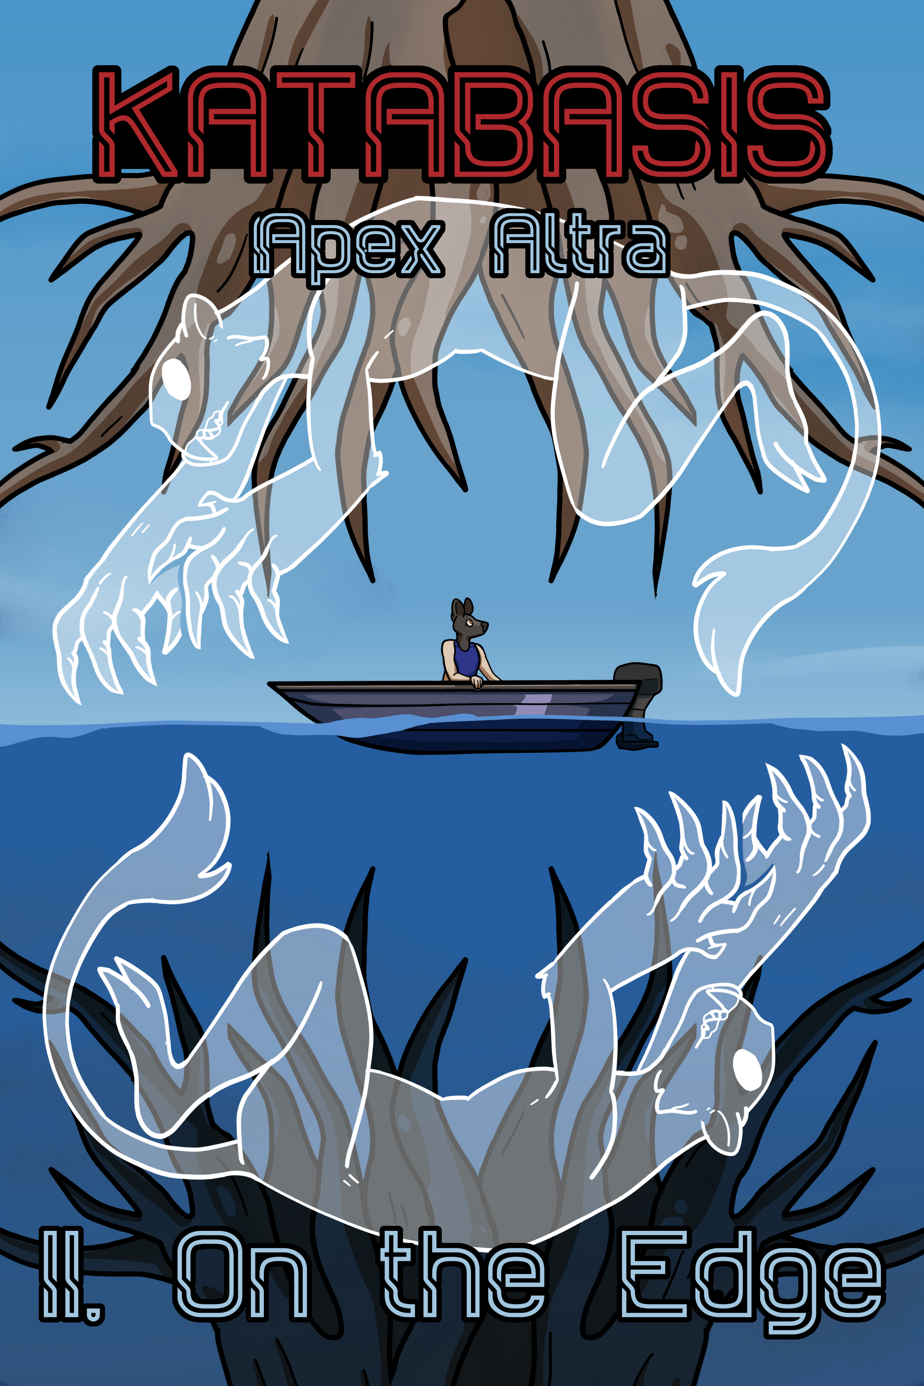 Image: The cover for chapter 2. Phoebe sits on a small, navy-blue boat in the water. She is looking to the side, and is dwarfed by her surroundings. Half of the image is underwater, while half is above, showing a blue sky. Giant tree roots encroach from above- the same roots are also mirrored, coming from underwater. Two leaping, translucent depictions of the feline monsters circle Phoebe, one above and one below. They are much larger than her. Text at the top reads: Katabasis. Smaller text underneath reads: Apex Altra. Text at the bottom reads: 2. On the Edge. End description.